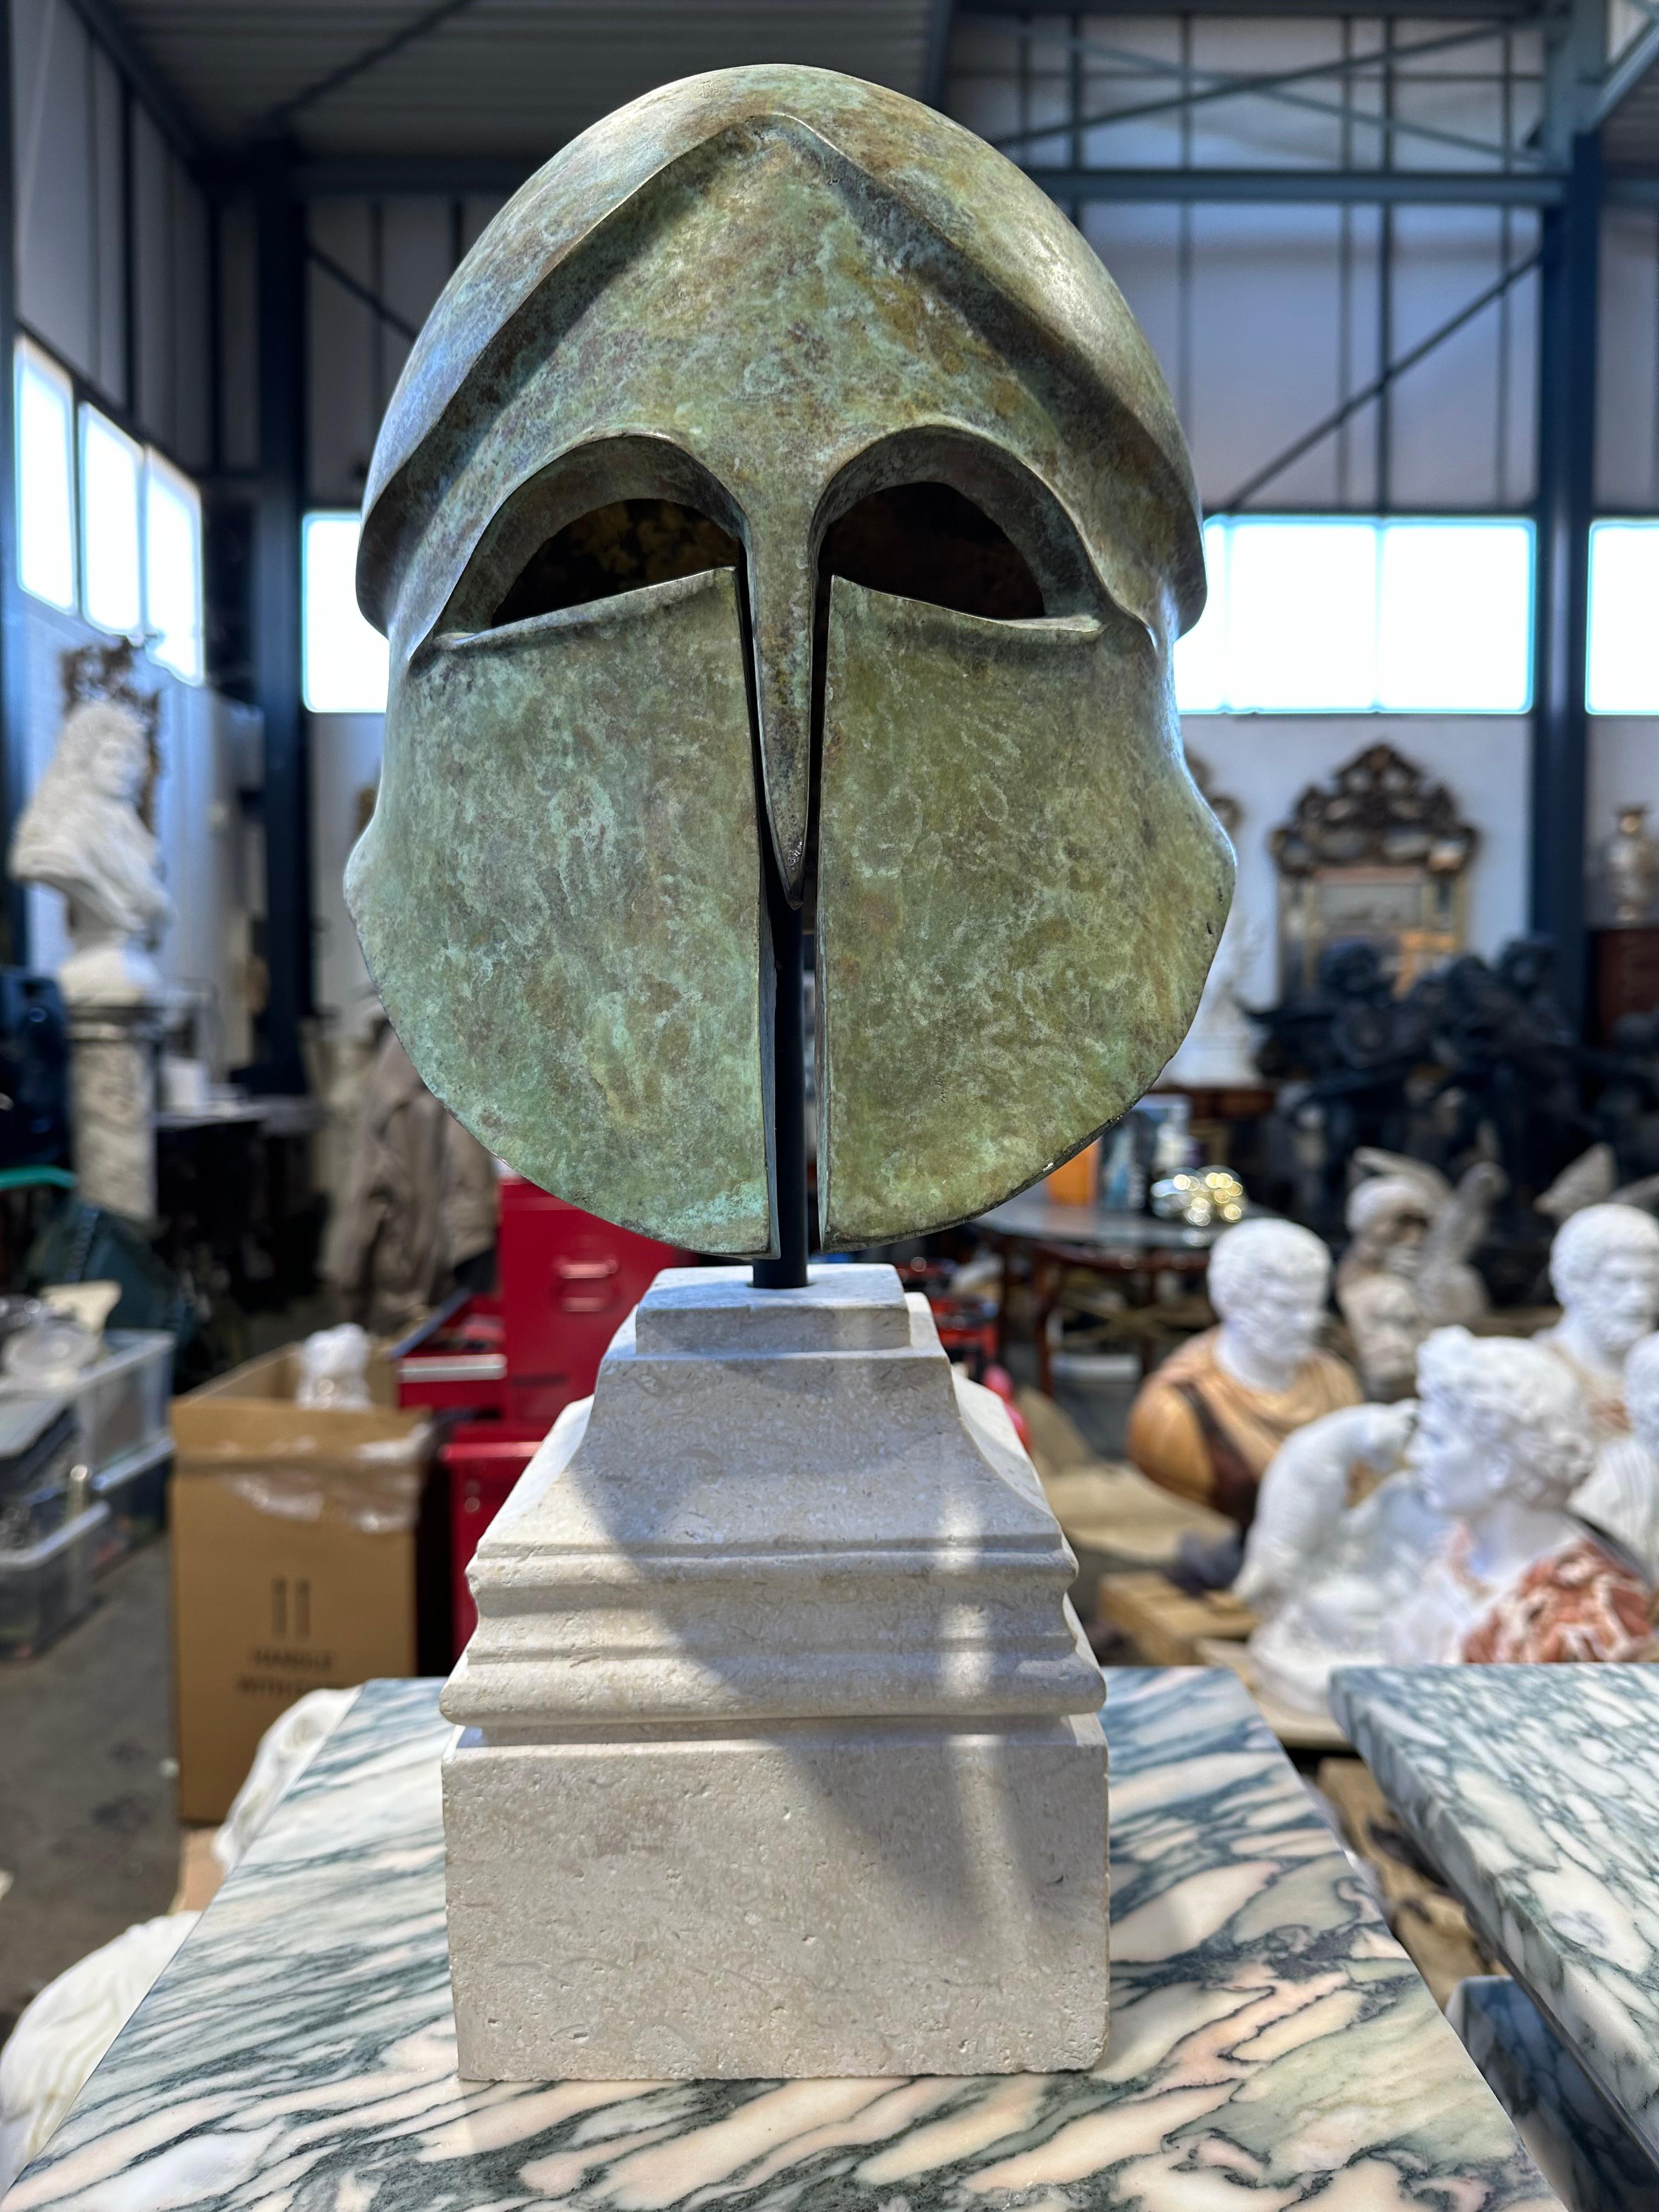 A Classical Greek Corinthian style warriors helmet in bronze on a limestone base. Reminiscent of ancient Greek warriors this helmet has a wonderful green verdigris patina and has a good weight to it. A stylish piece that would look stunning as a